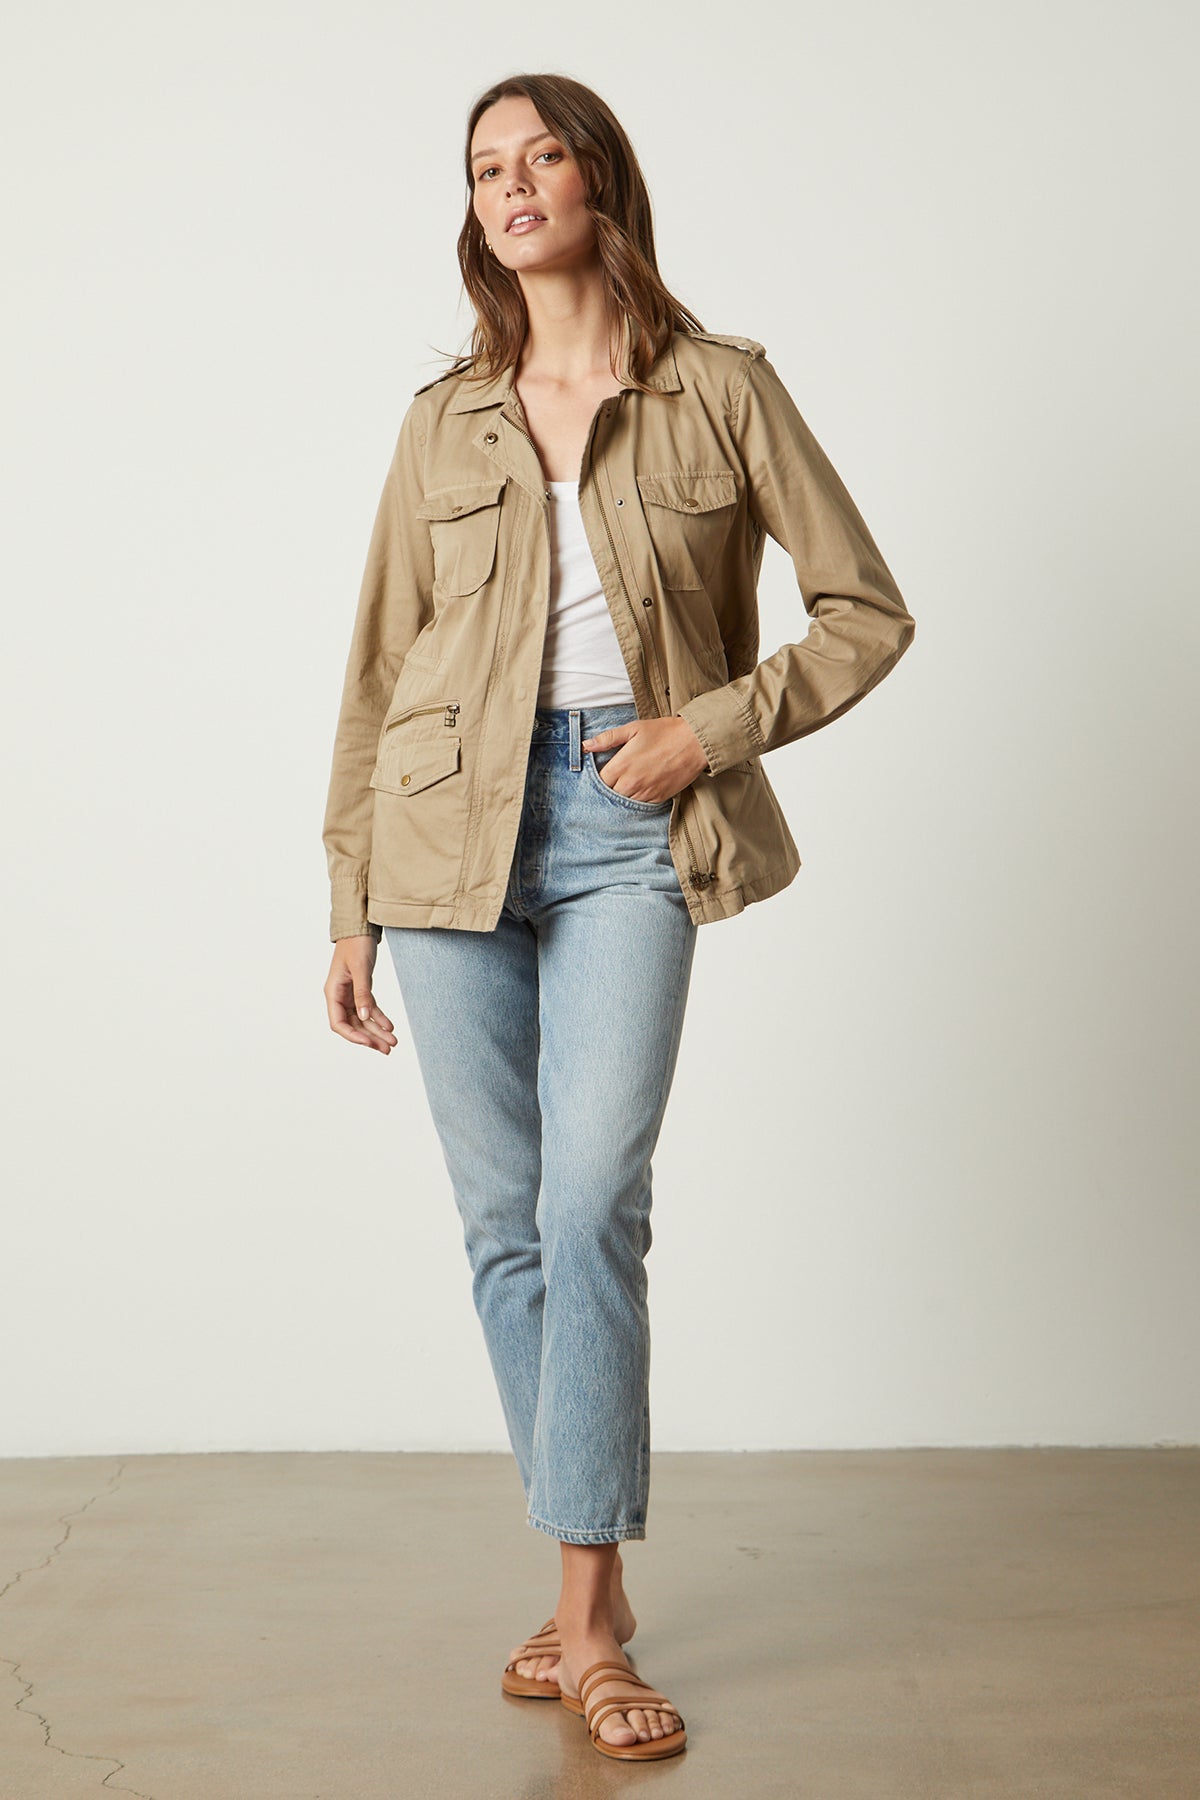 The woman is wearing jeans and a Velvet by Graham & Spencer RUBY LIGHT-WEIGHT ARMY JACKET.-26632088715457